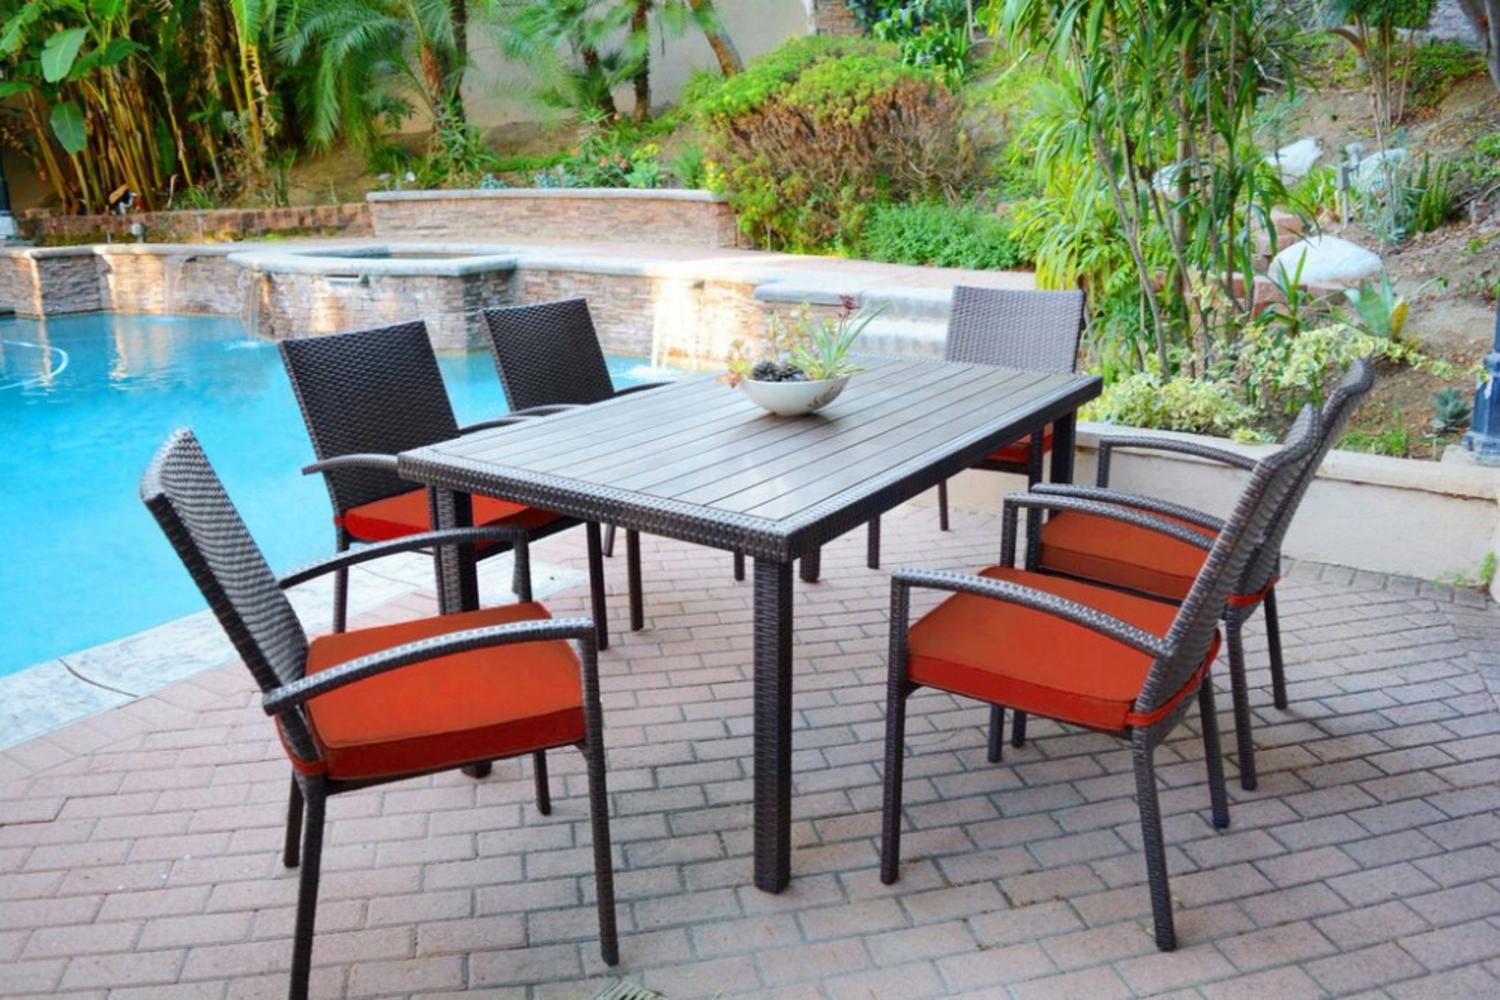 7-Piece Espresso Resin Wicker Outdoor Table and Chairs Furniture Set